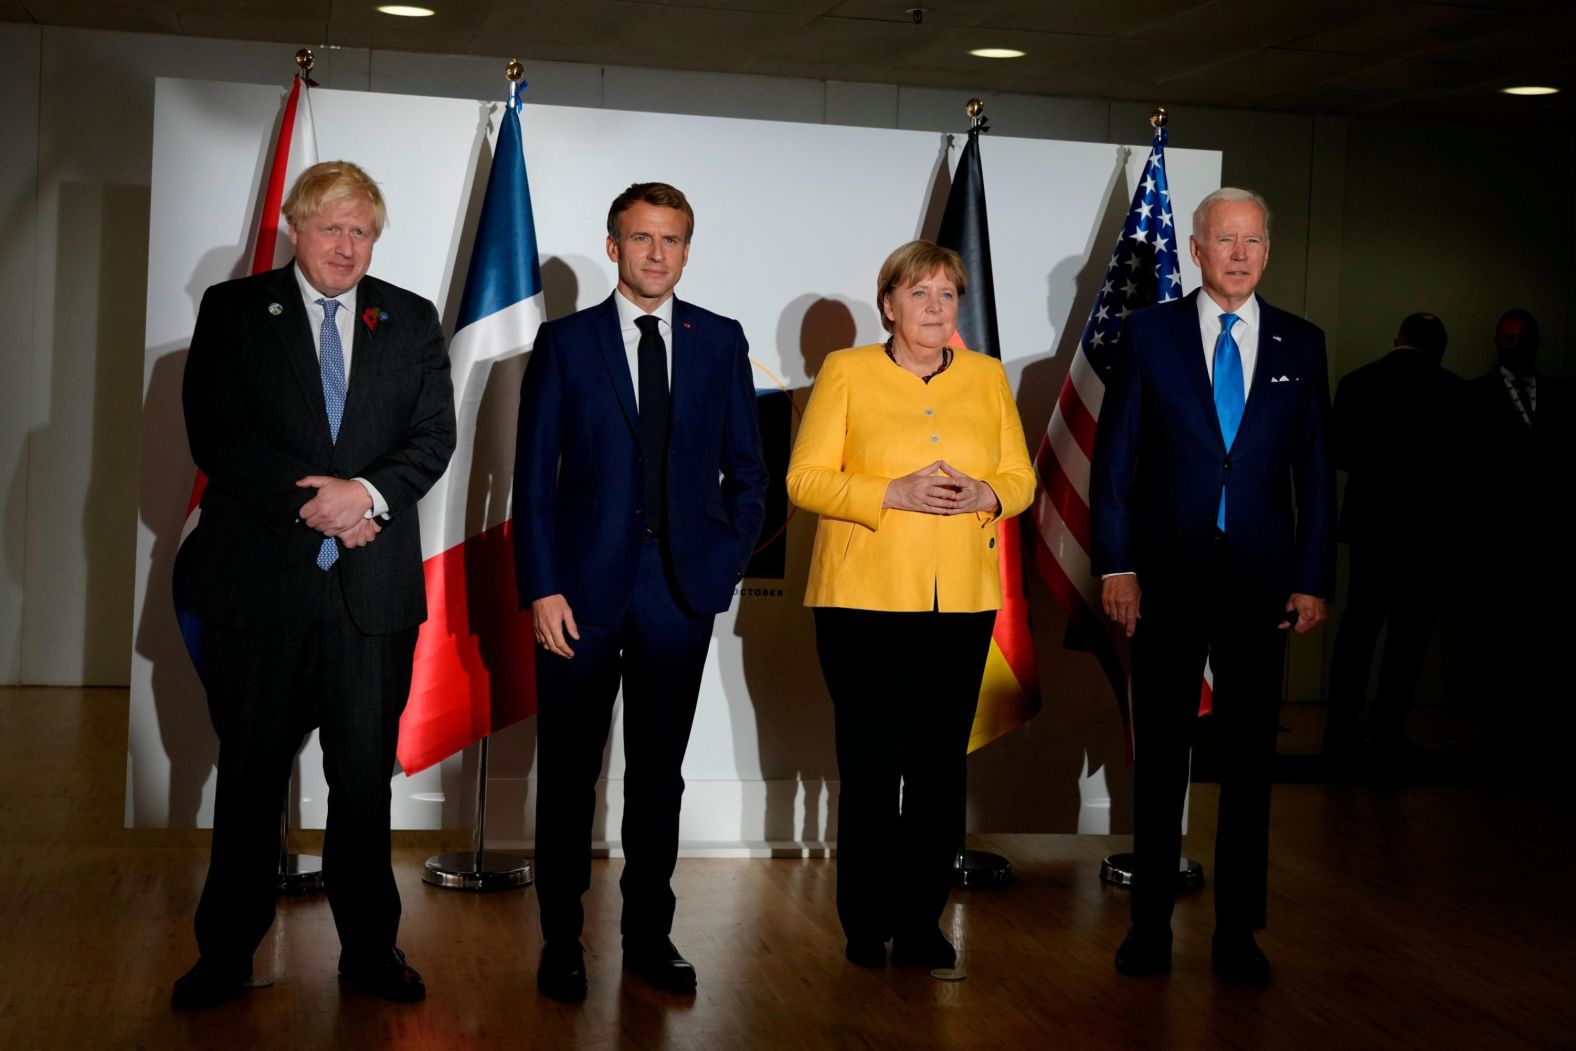 From left, Johnson, Macron, German Chancellor Angela Merkel and Biden pose for photos before a meeting on Saturday. They were meeting to <a href="index.php?page=&url=https%3A%2F%2Fwww.cnn.com%2Fworld%2Flive-news%2Fg20-rome-saturday-session%2Fh_d69b26aeed87aa61ecc0fa98508ccaf6" target="_blank">discuss next steps in negotiations with Iran.</a>